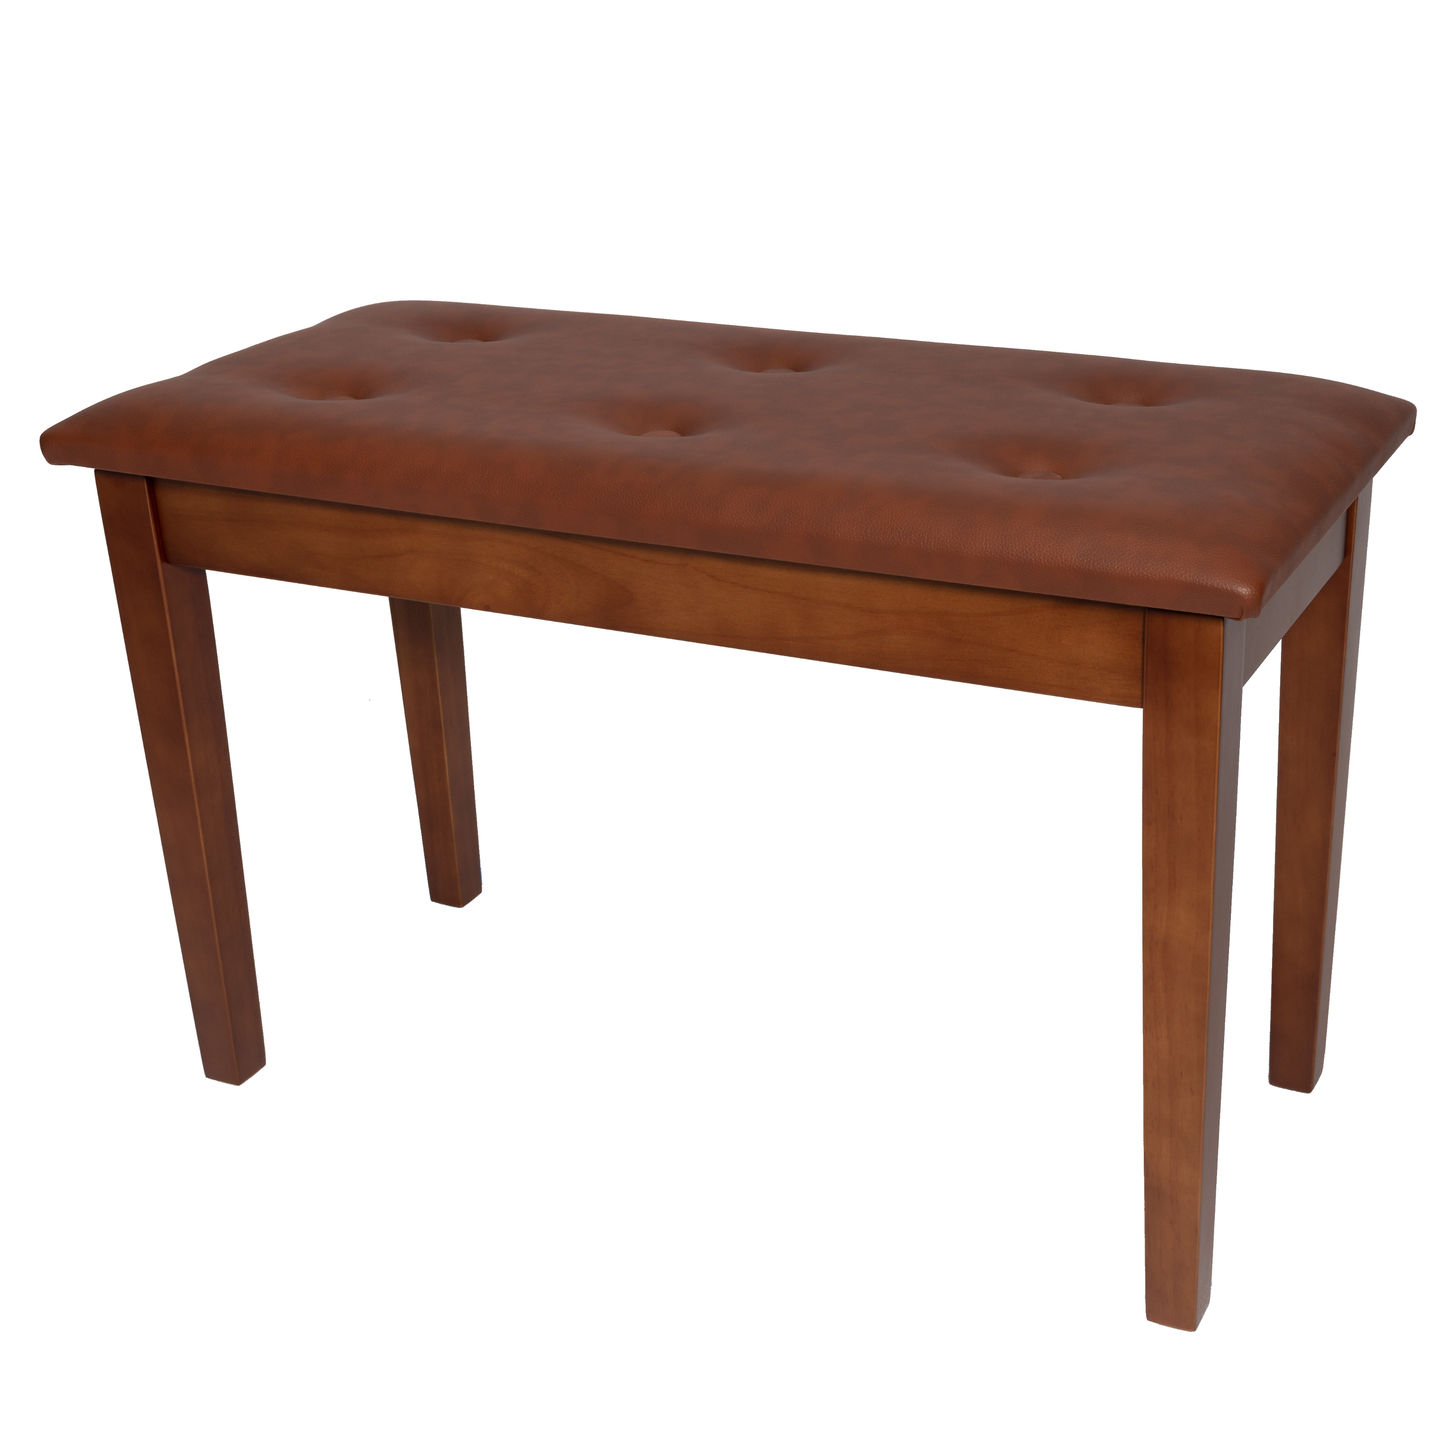 Crown Standard Tufted Duet Piano Stool with Storage Compartment (Walnut)